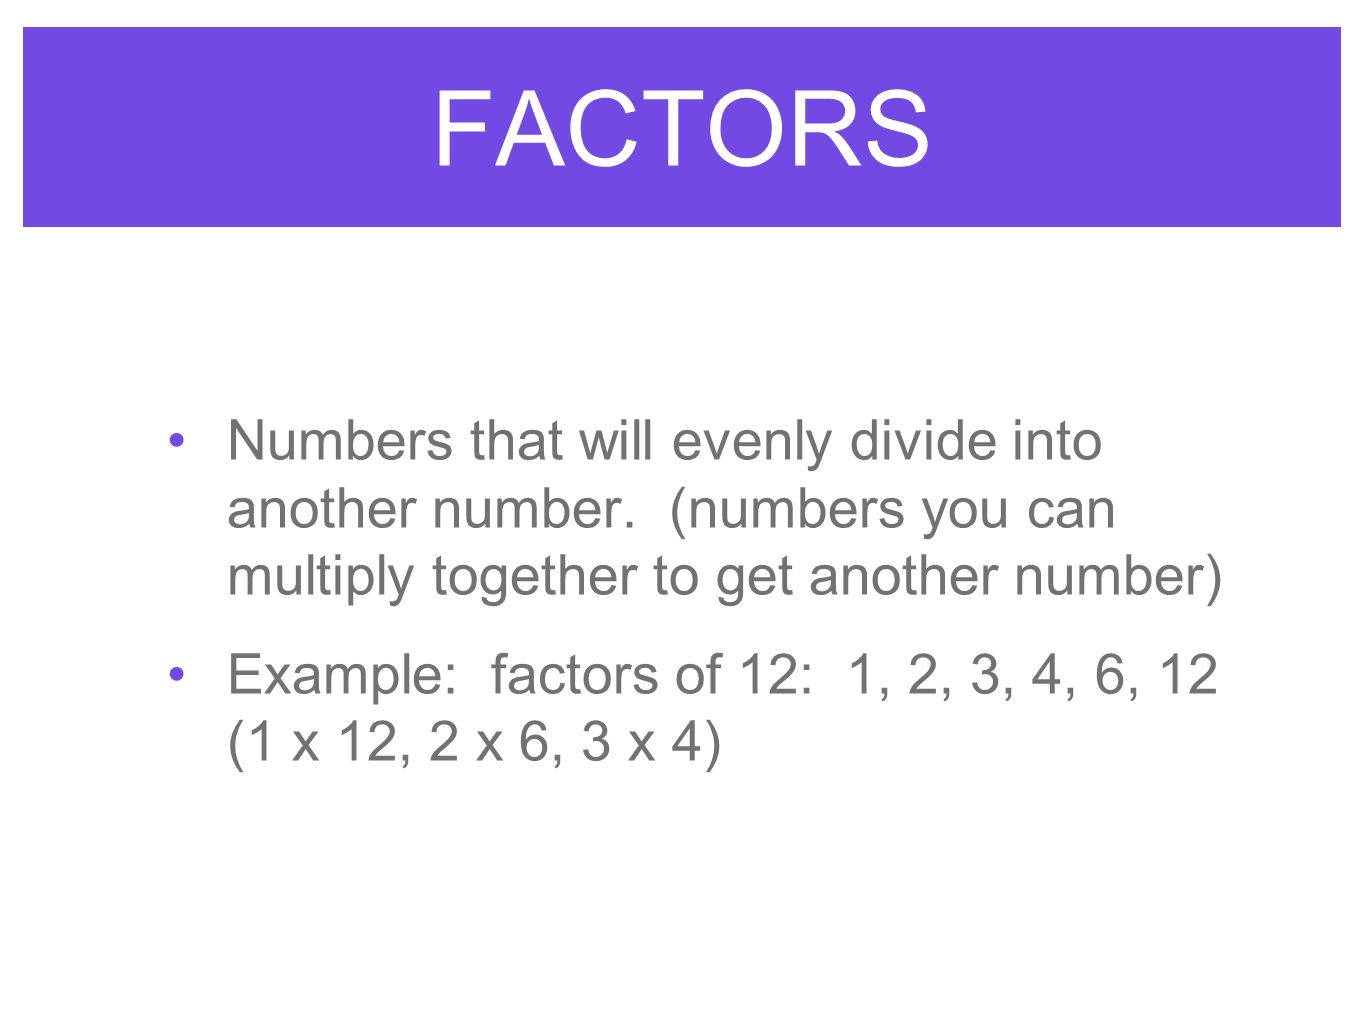 FACTORS Numbers that will evenly divide into another number. (numbers you can multiply together to get another number)